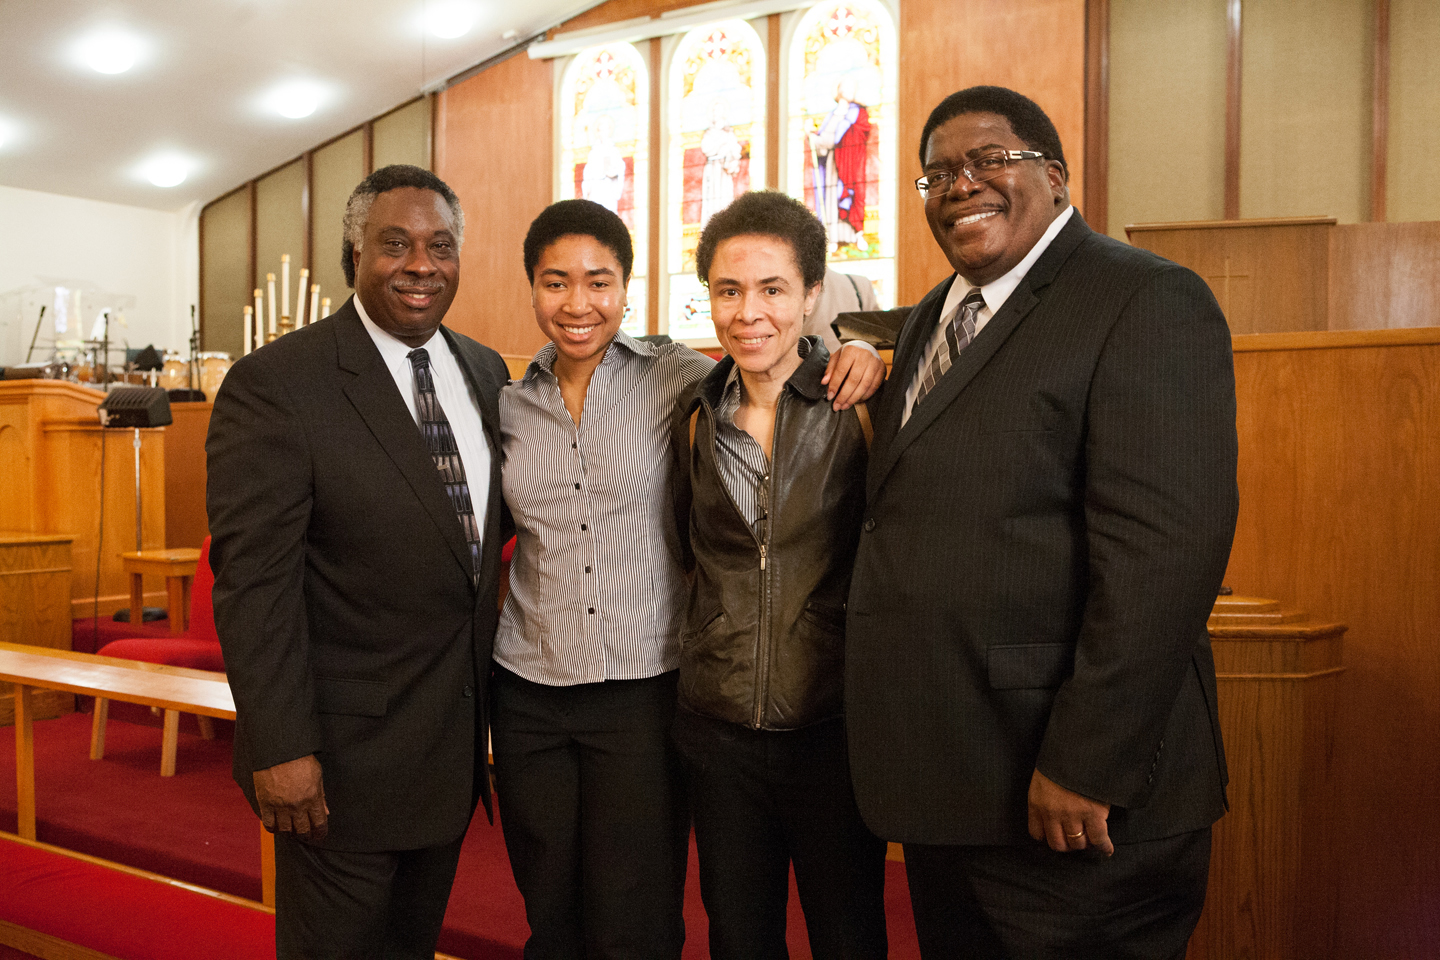 Pastor Carey Anderson of First AME, left, with the Buhl family earlier this month.